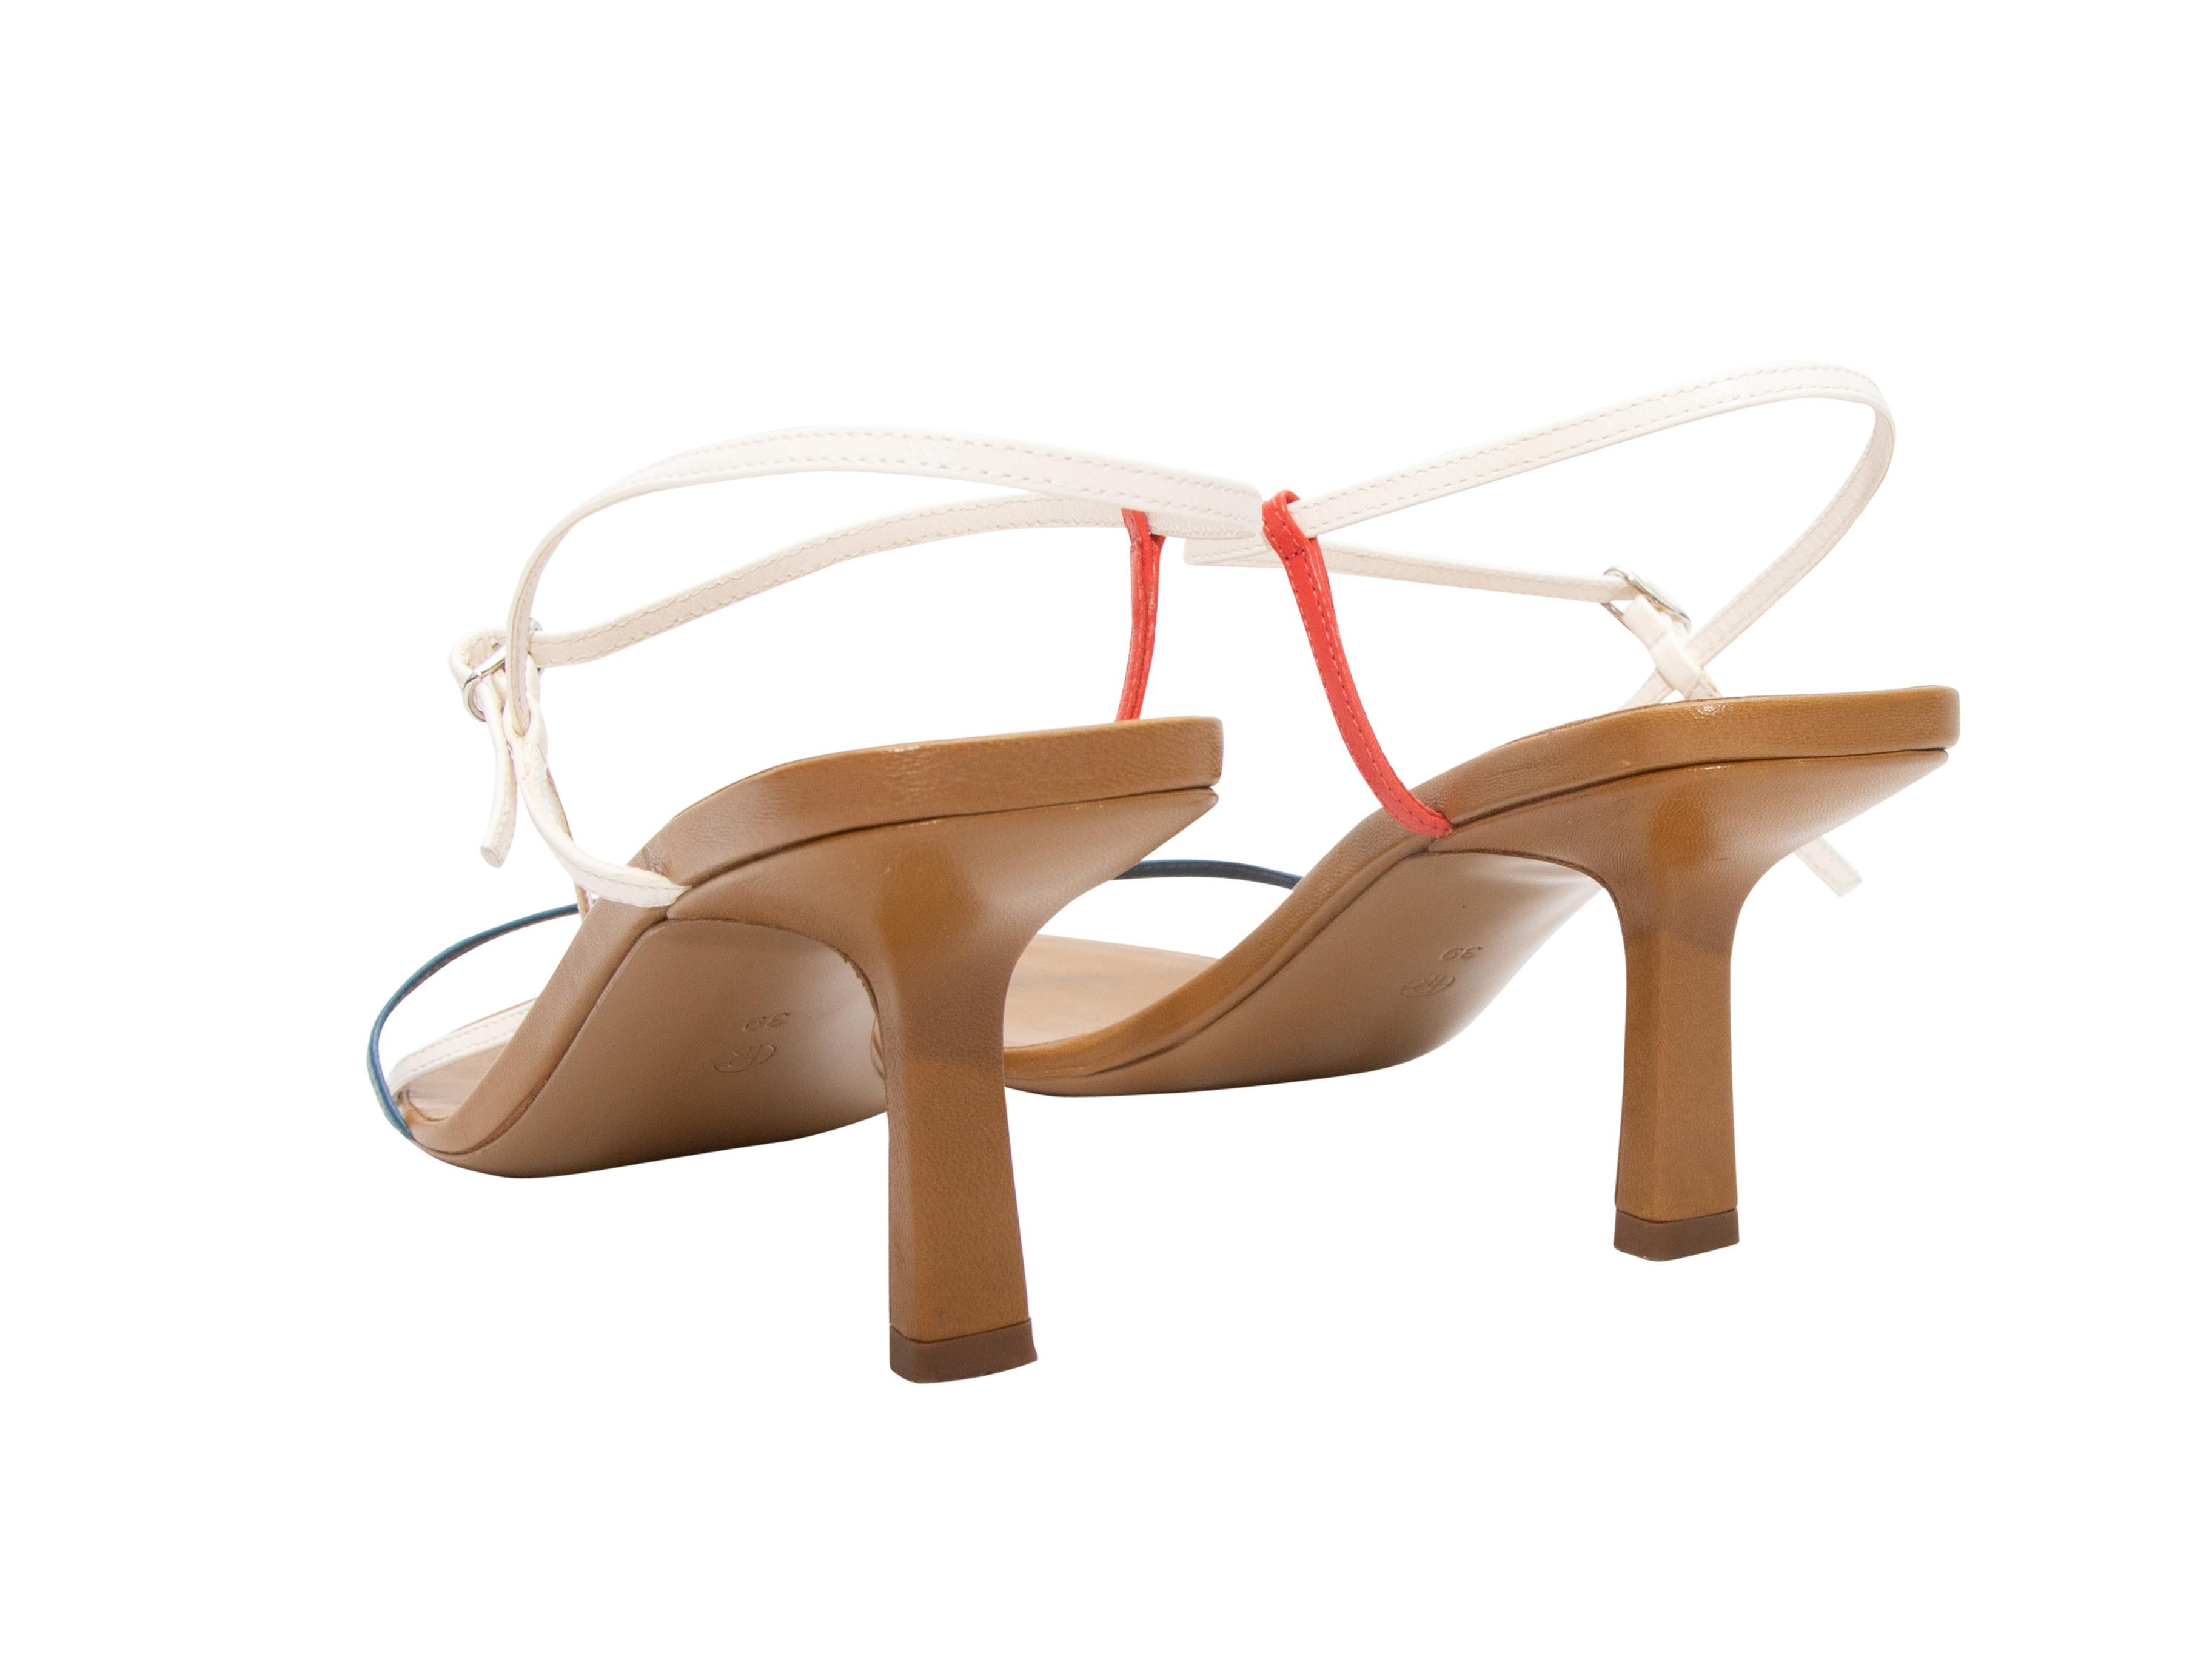 Tan and multicolor Bare heeled sandals by The Row. Buckle closures at ankle straps. 3